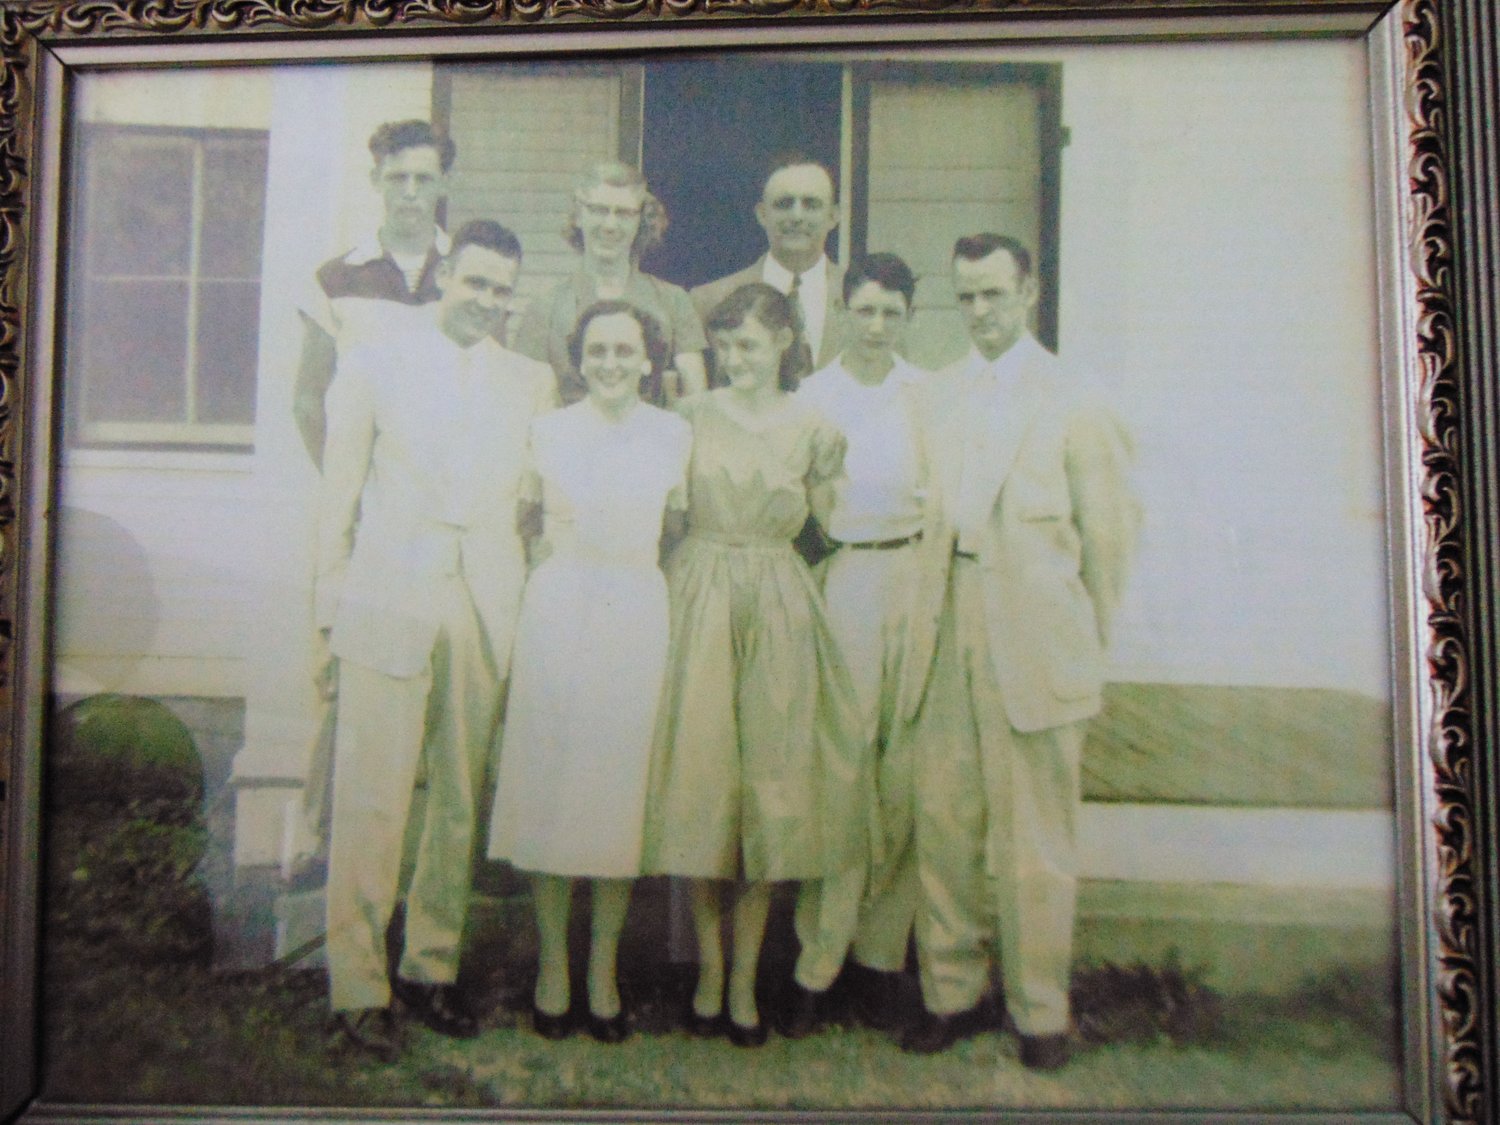 An old photo of
the Fann family from the
early 1950s. Morris and
Dorris are on the end of
the first row, respectively.
Wilma and Bill are third
and fourth in the front row,
respectively. Also pictured
are their parents, in the
back row, and a brother
and sister (not twins).